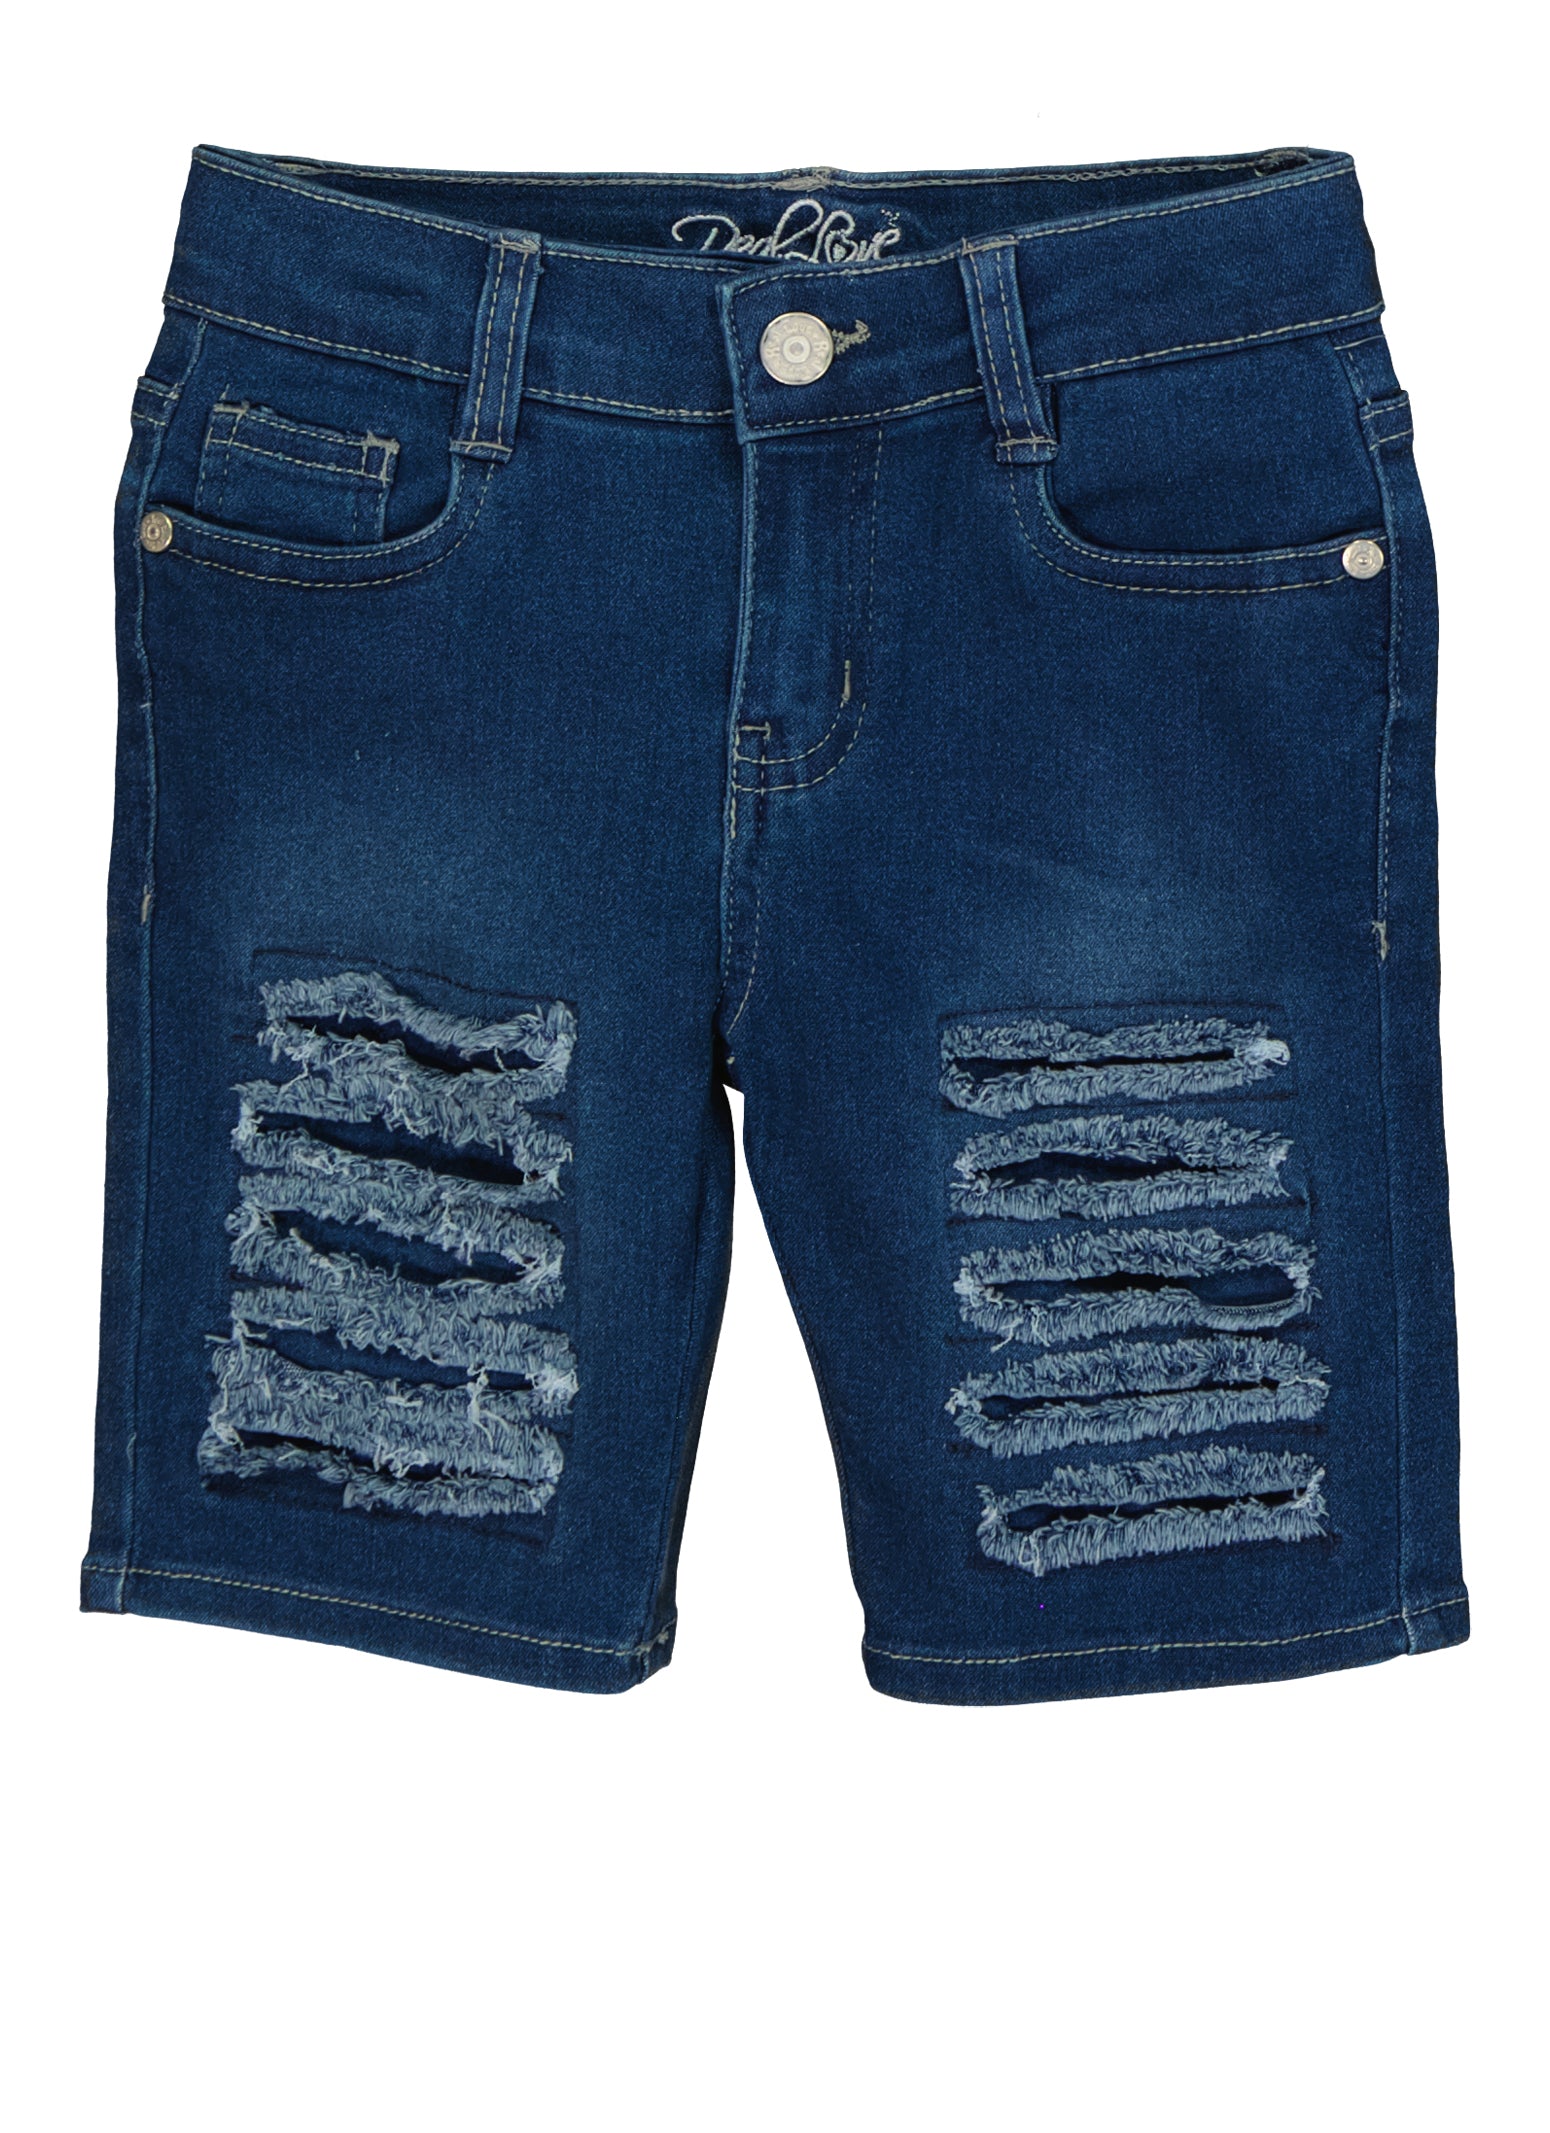 Girls NM Ripped Jean Shorts | Ripped jean shorts, Clothes design, Fashion